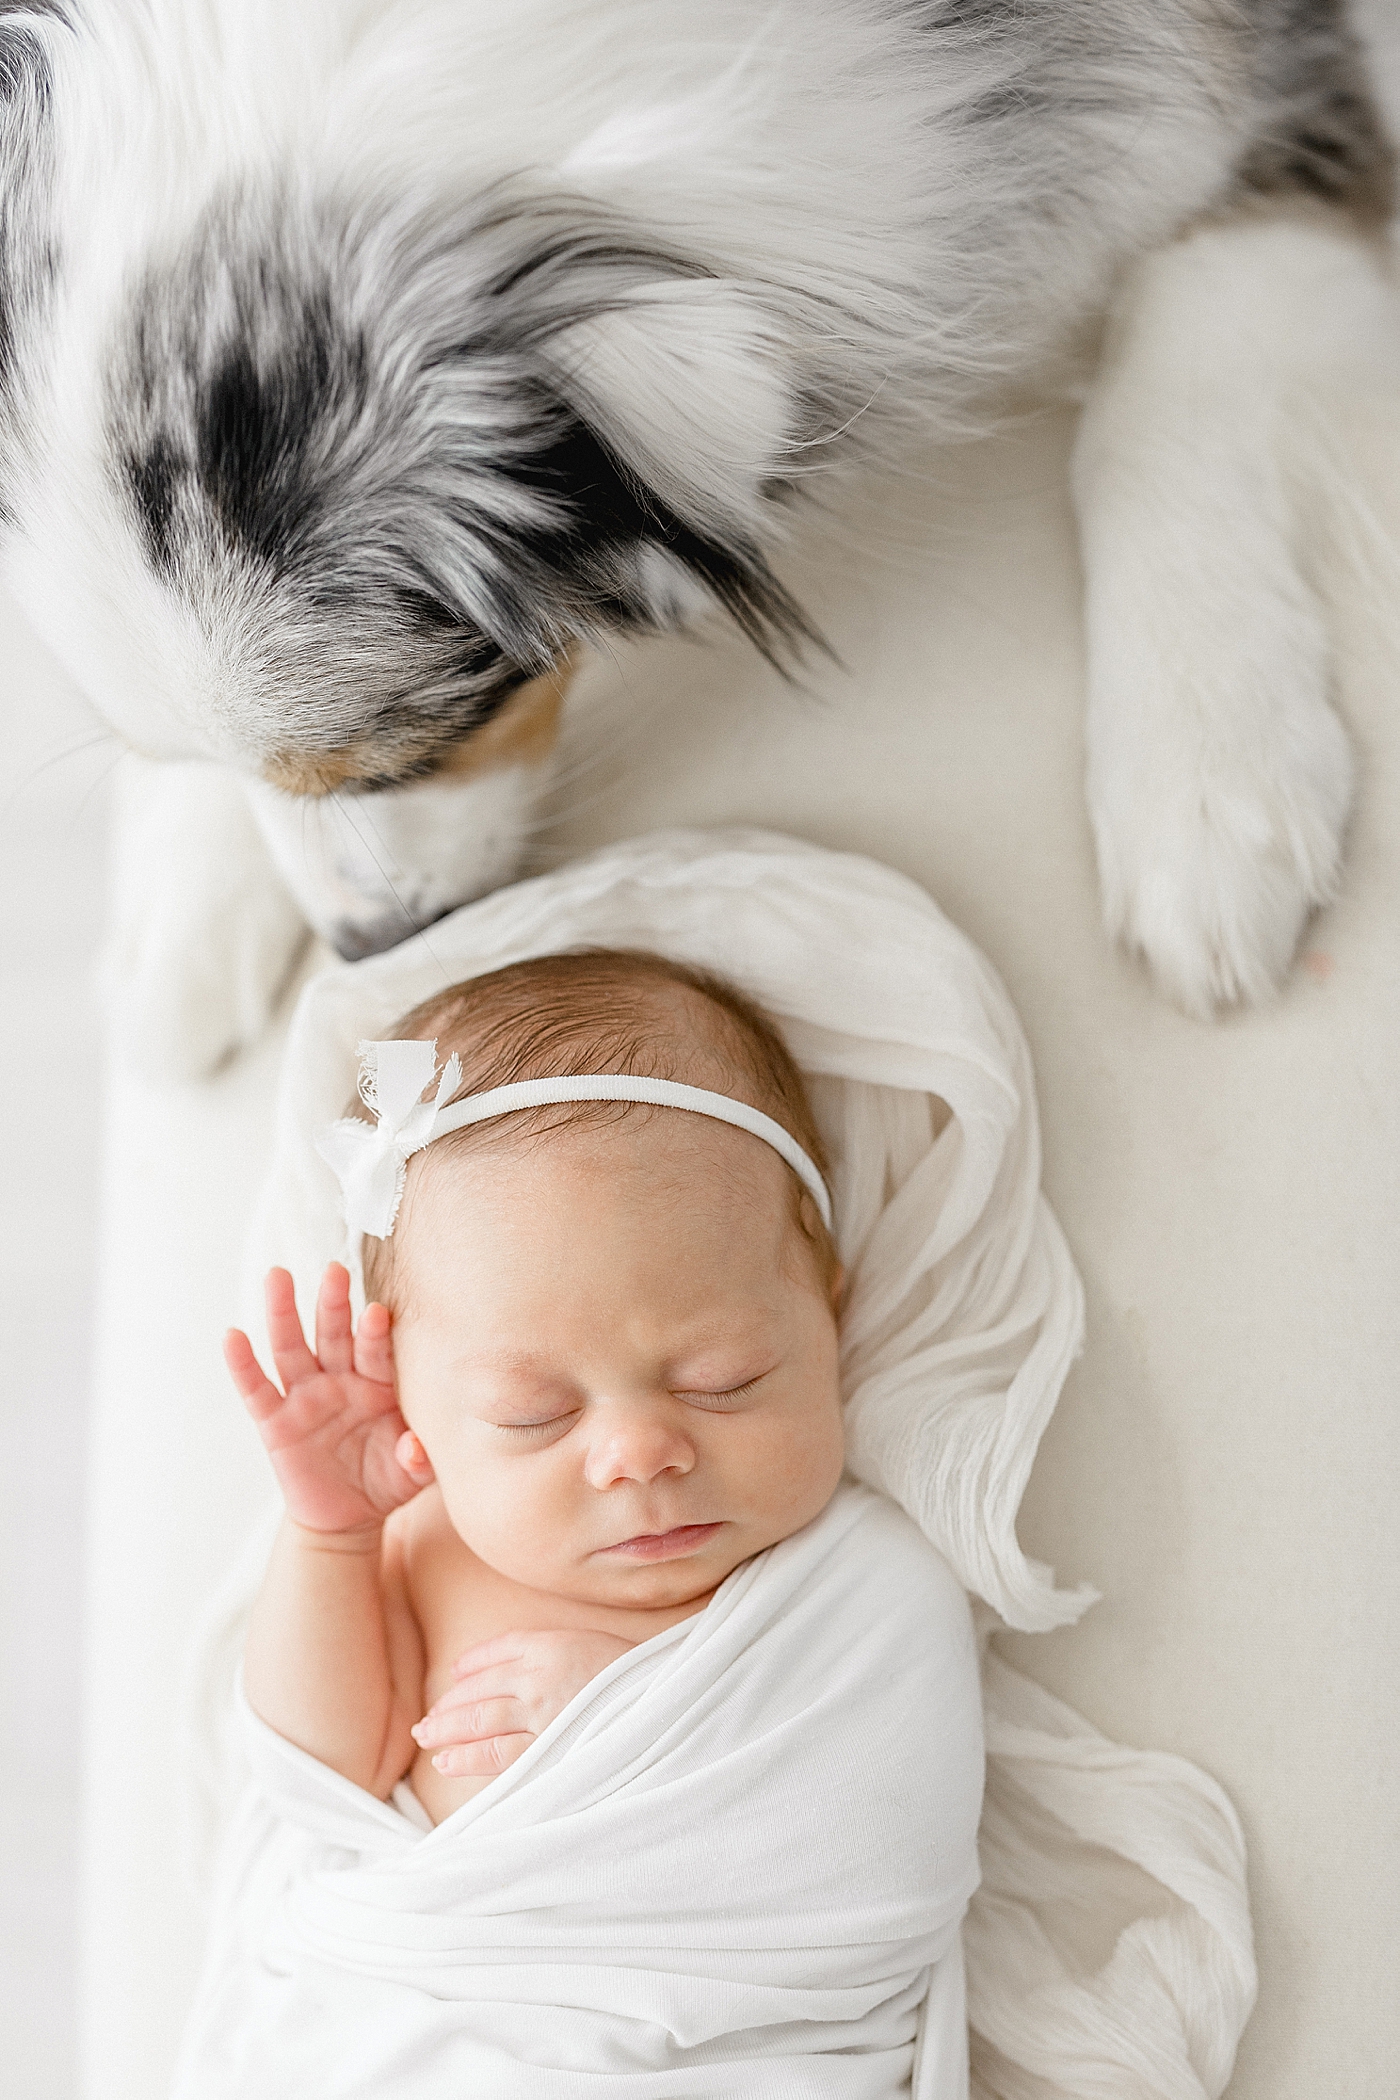 Newborn session with baby and family dog in studio in Tampa. Photo by Brittany Elise Photography.